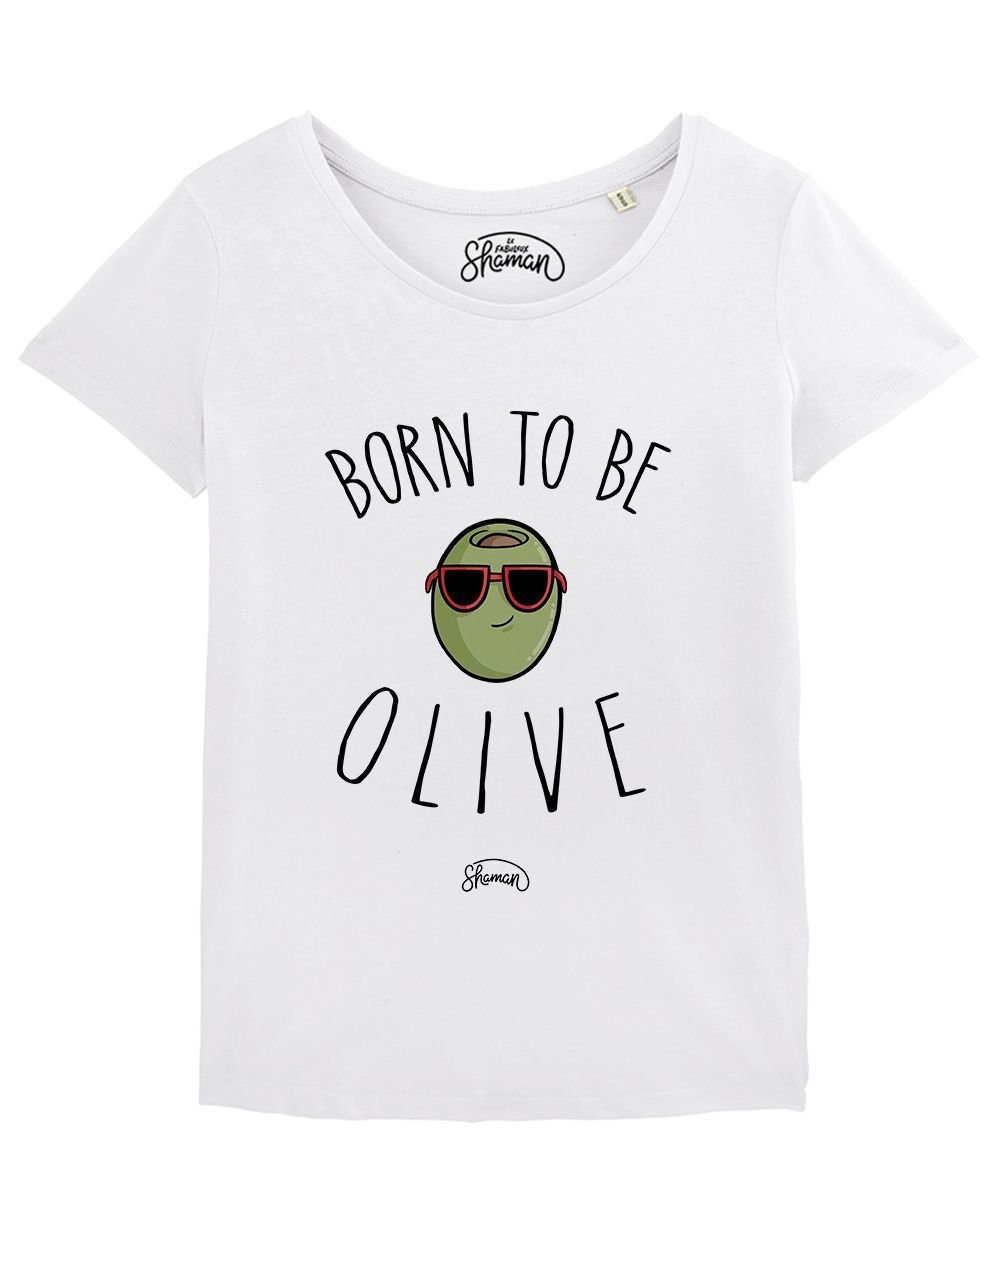 T-shirt "Born to be olive"